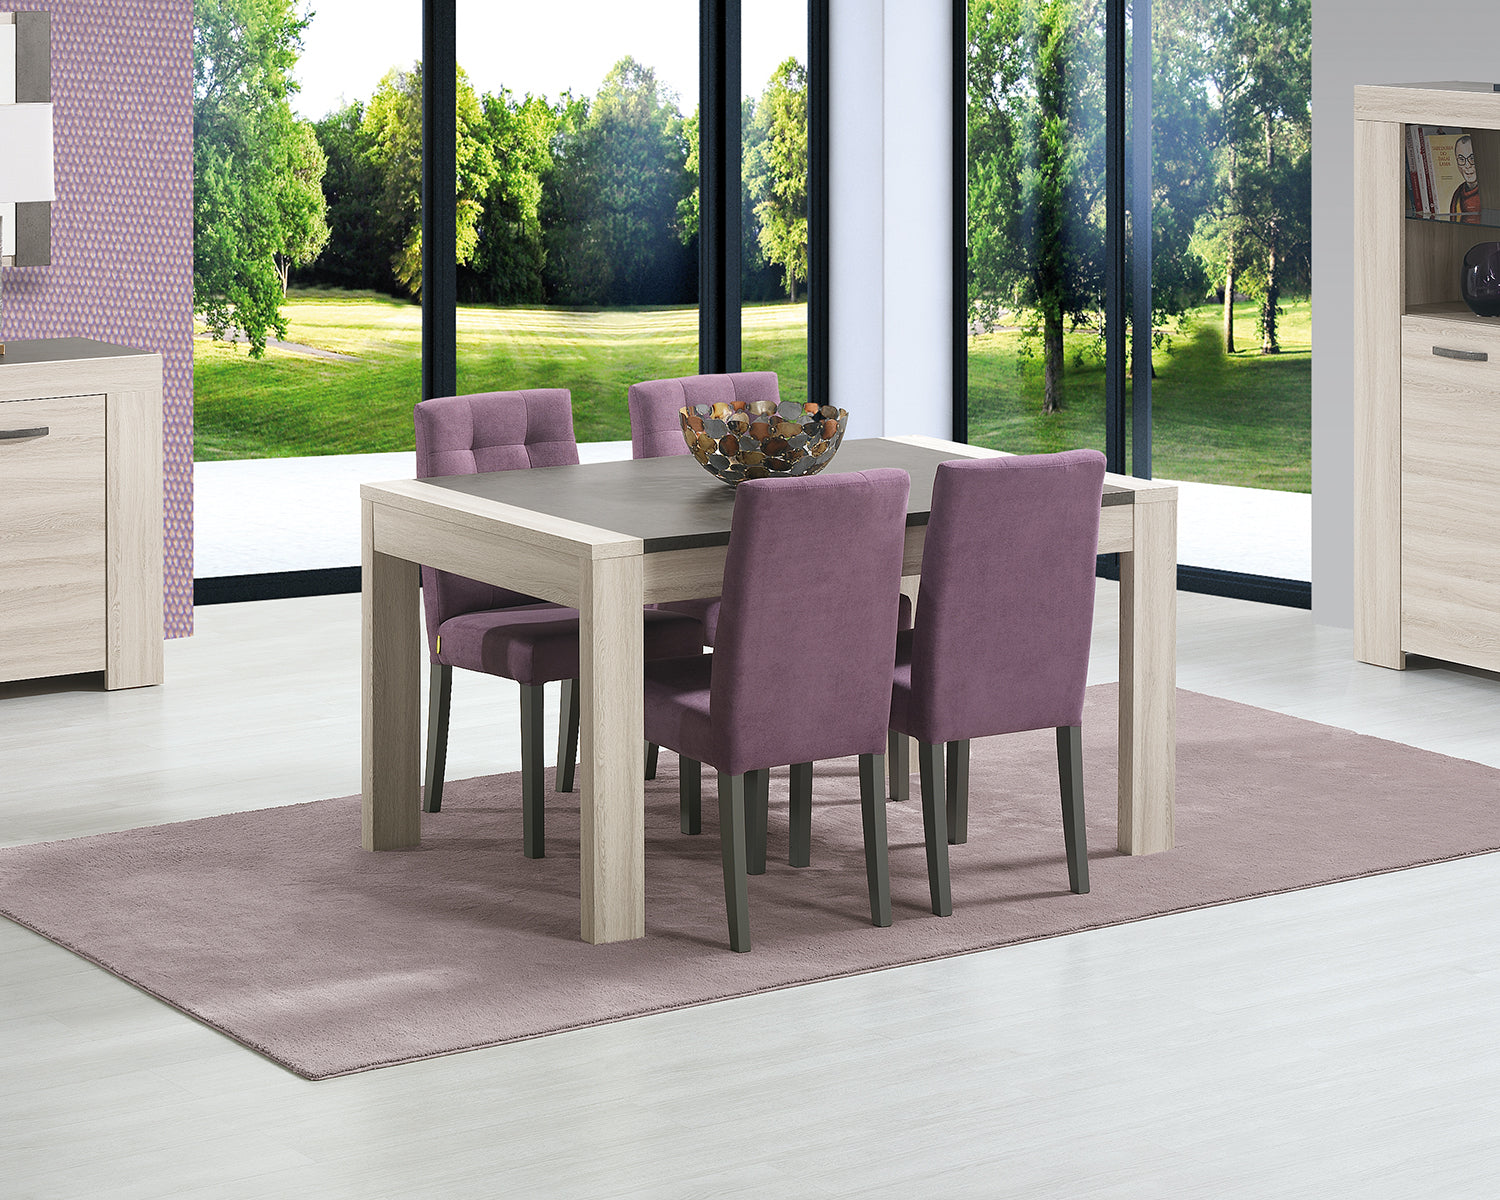 Fabric dining chairs with wooden legs.